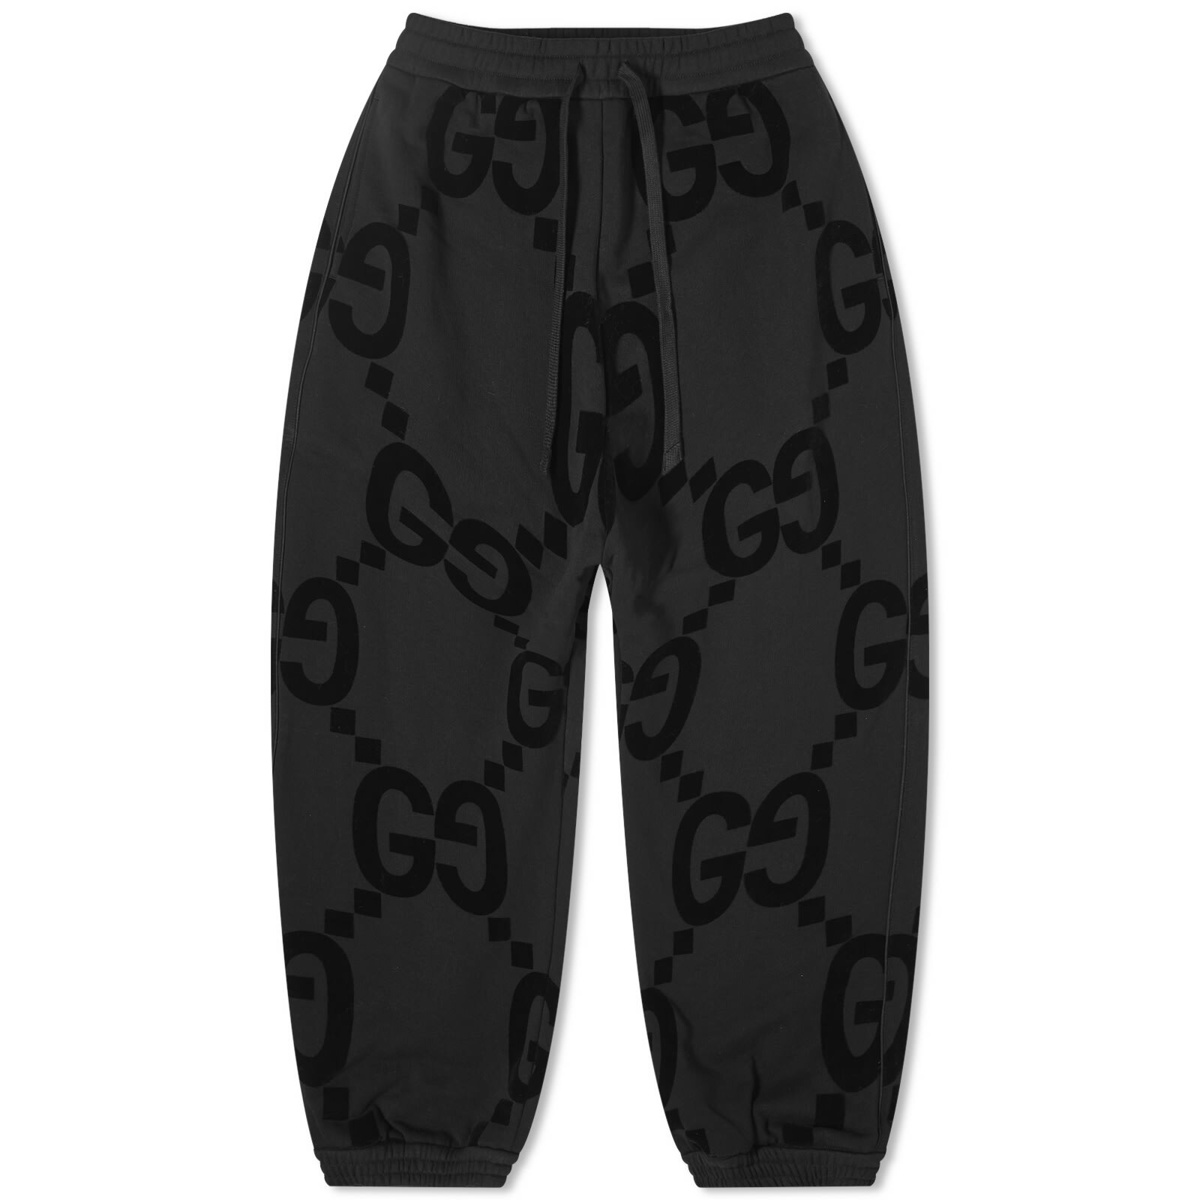 Slocog Shop - Gucci Black White Hoodie Sweatpants Pants Luxury Brand  Clothing Clothes Outfit For Men ND - Gucci Pre-Owned cut-out fitted dress